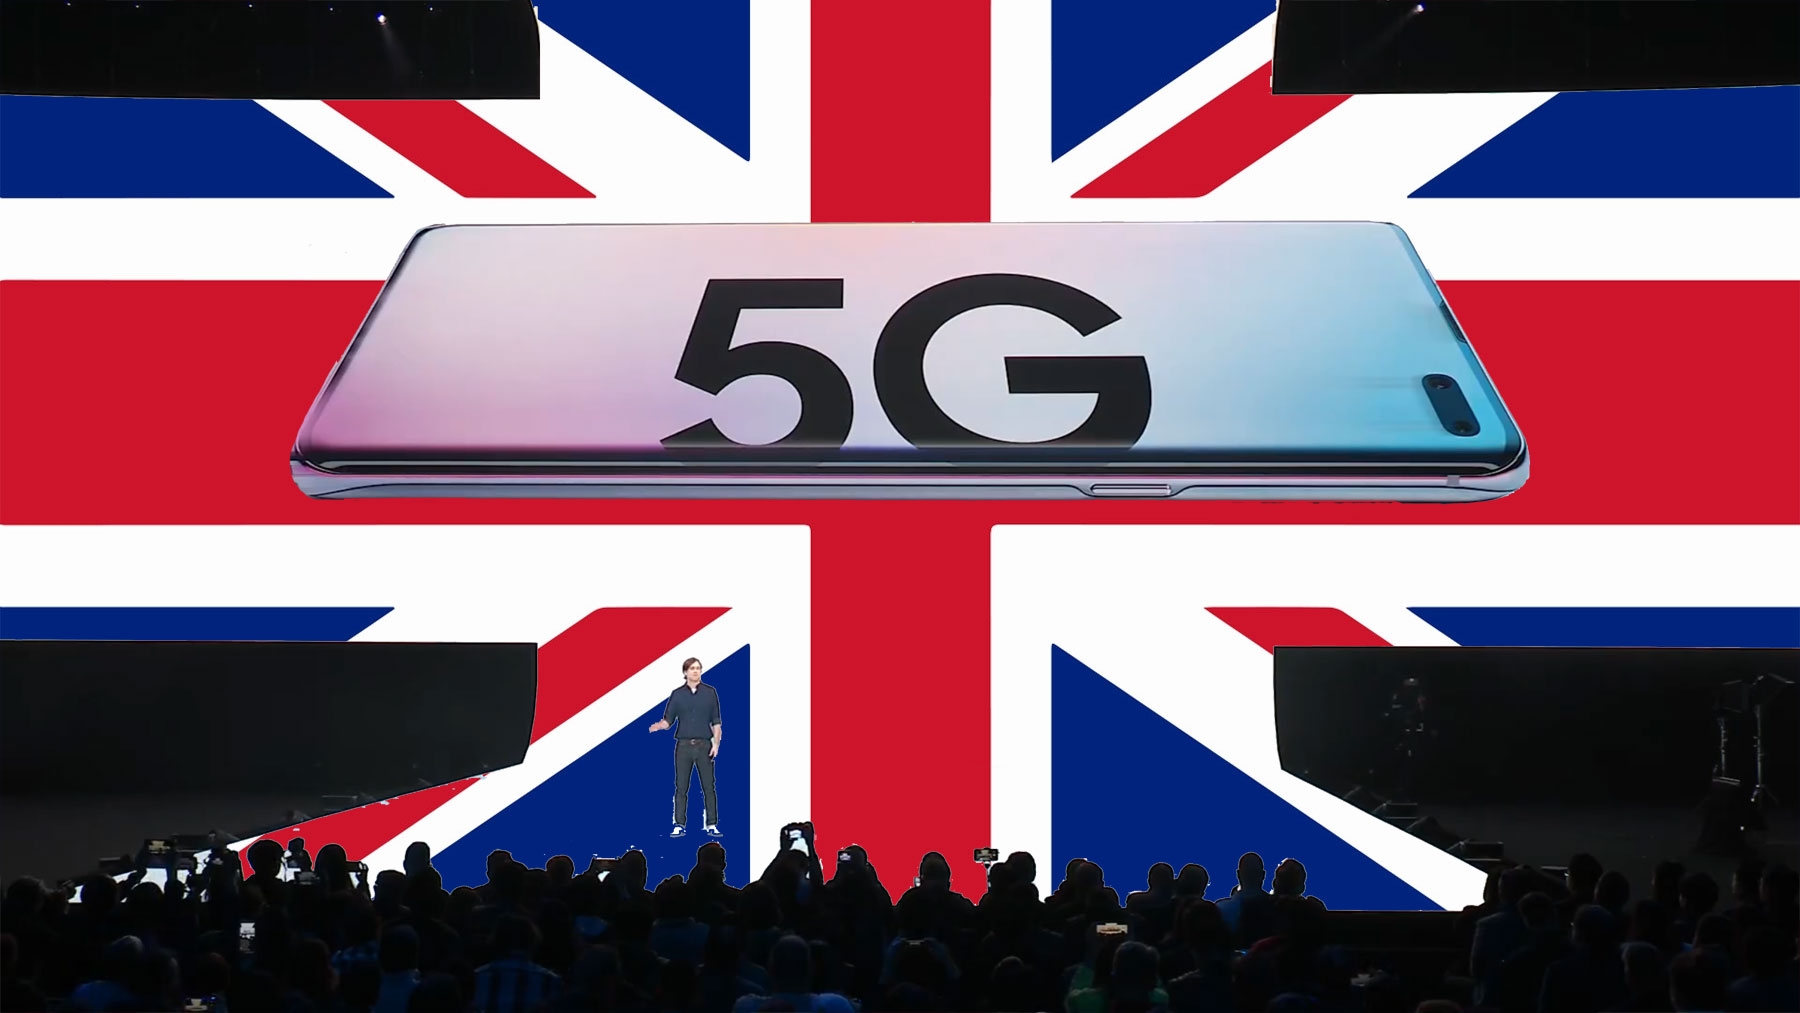 U.K. without further investment, 5G deployment may fall short.